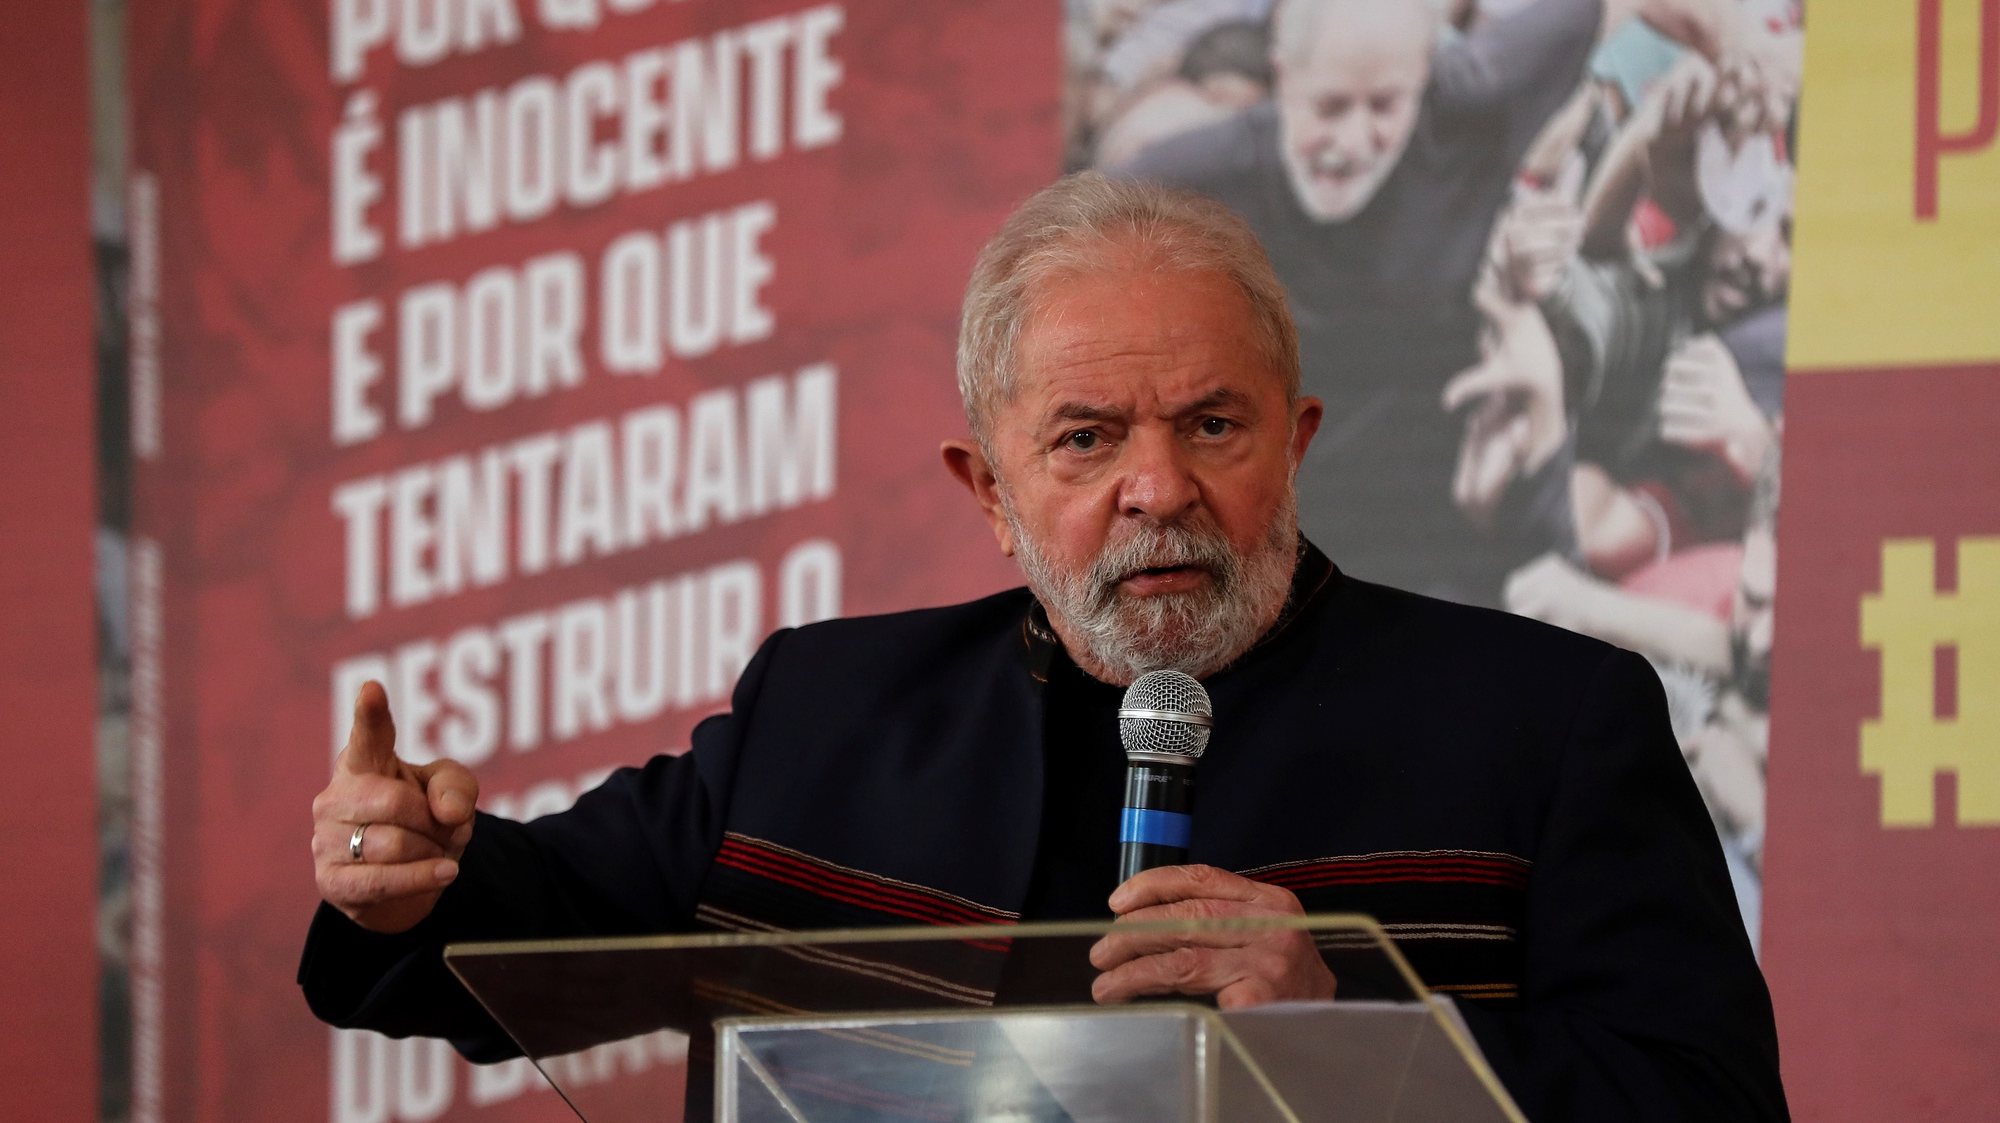 epa09411302 Former Brazilian President Luiz Inacio Lula da Silva speaks during the presentation of a book on his judicial process, in Sao Paulo, Brazil, 12 August 2021. In the book, titled &#039;Memorial of the Truth&#039; Lula details first-hand the trials he faced during the case known as Operation Lava Jato.  EPA/Sebastiao Moreira